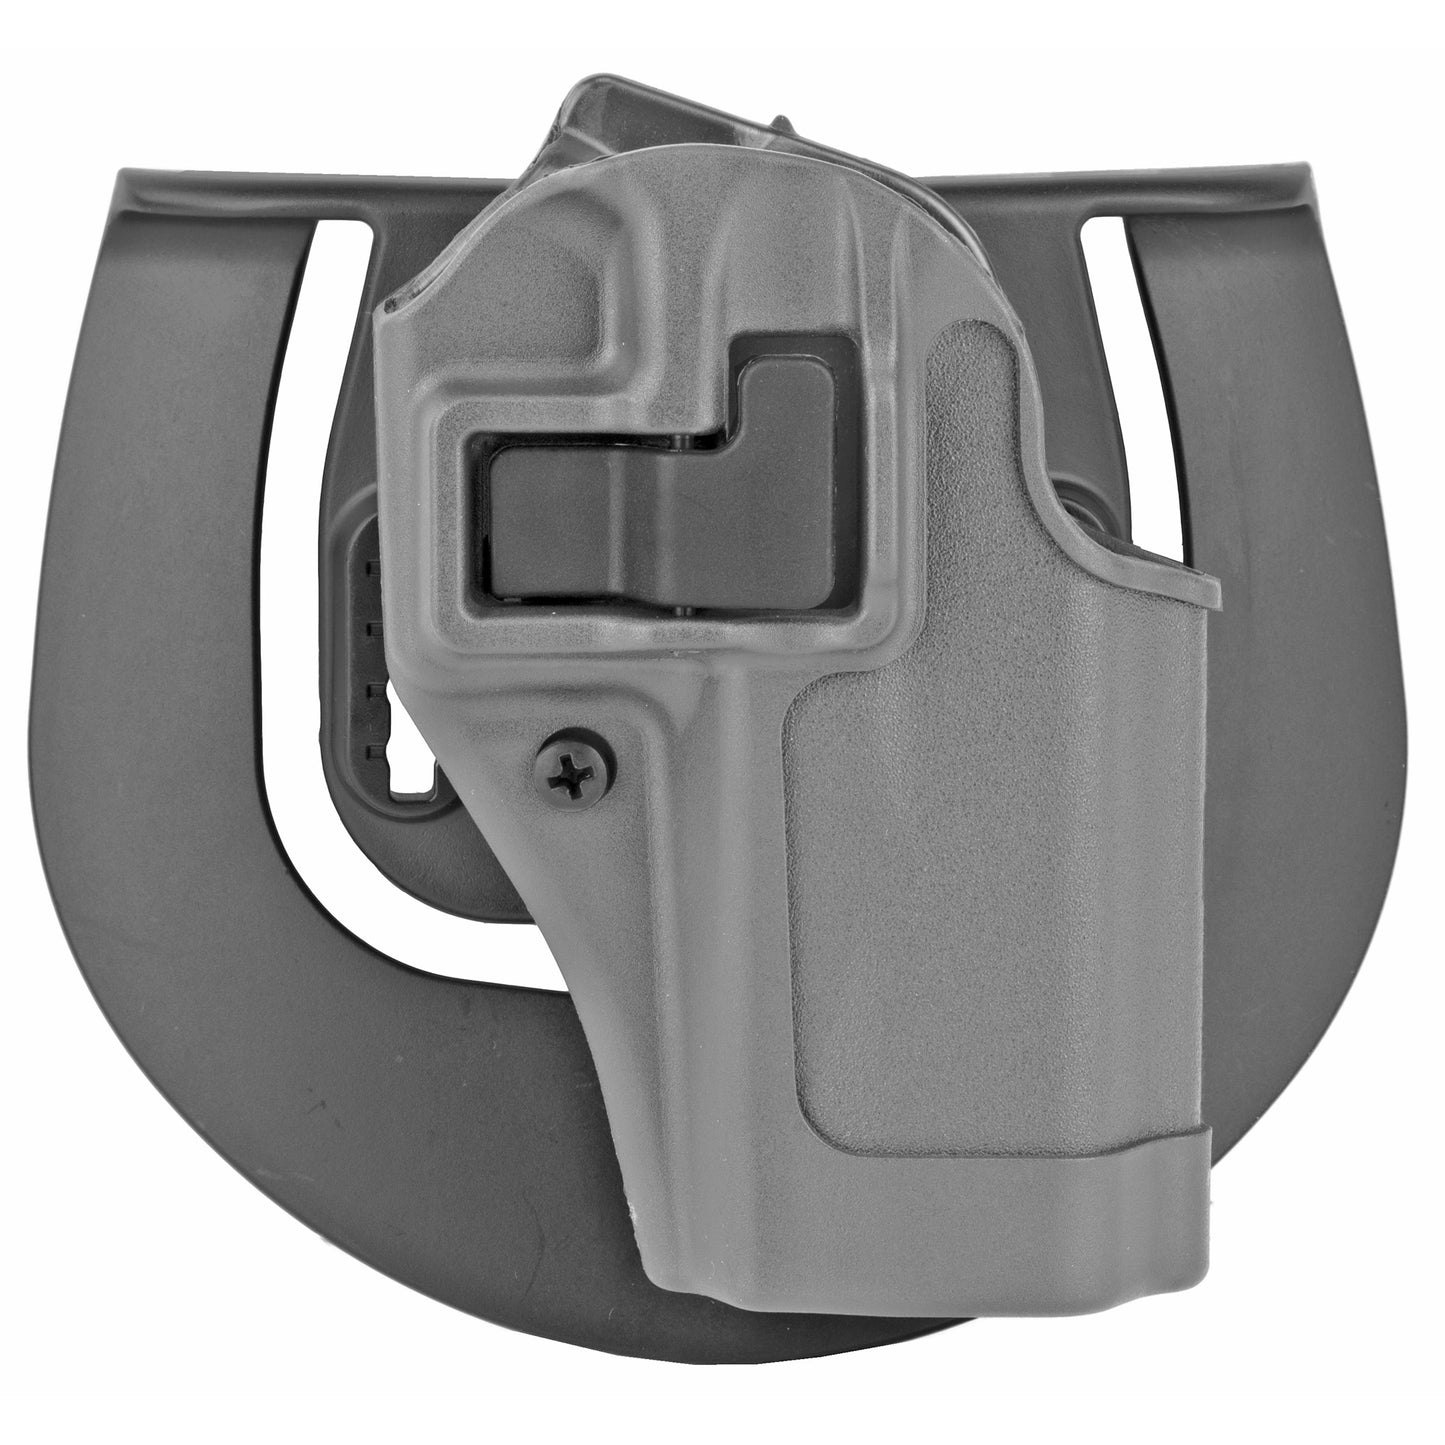 BLACKHAWK, SERPA Sportster, Fits S&W M&P9/40, Right Hand, Gray Finish, Includes Paddle Platform Only